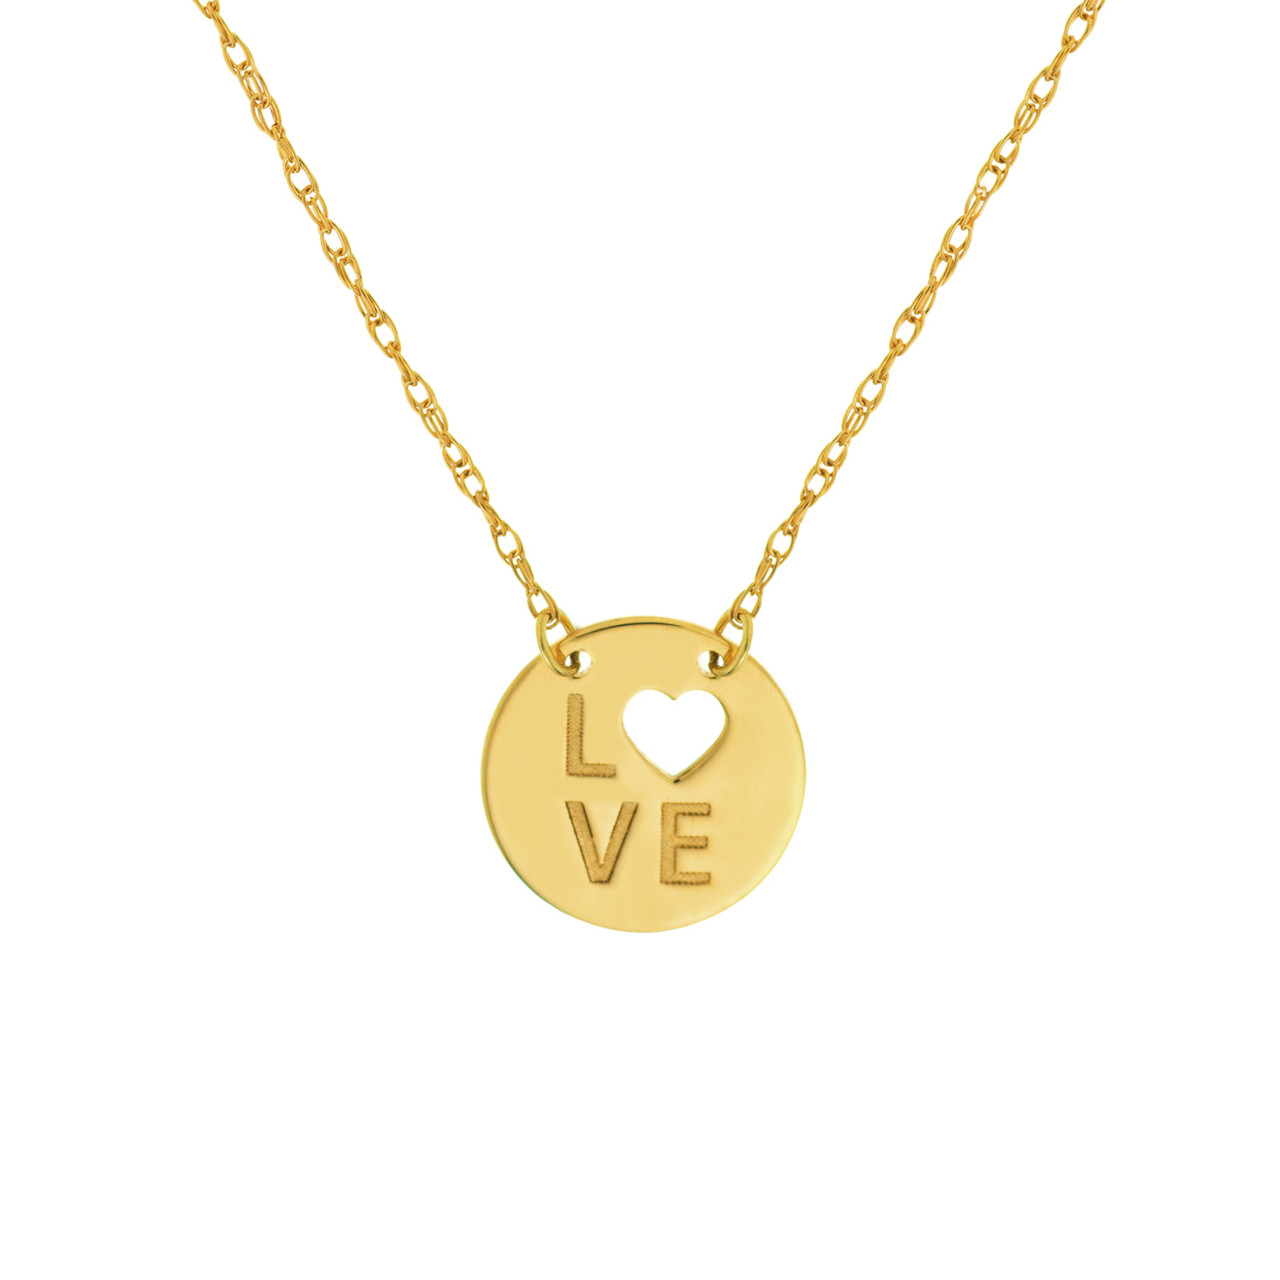 Yellow Gold So You Cutout Heart Love Mini Disc Necklace l 18 inches